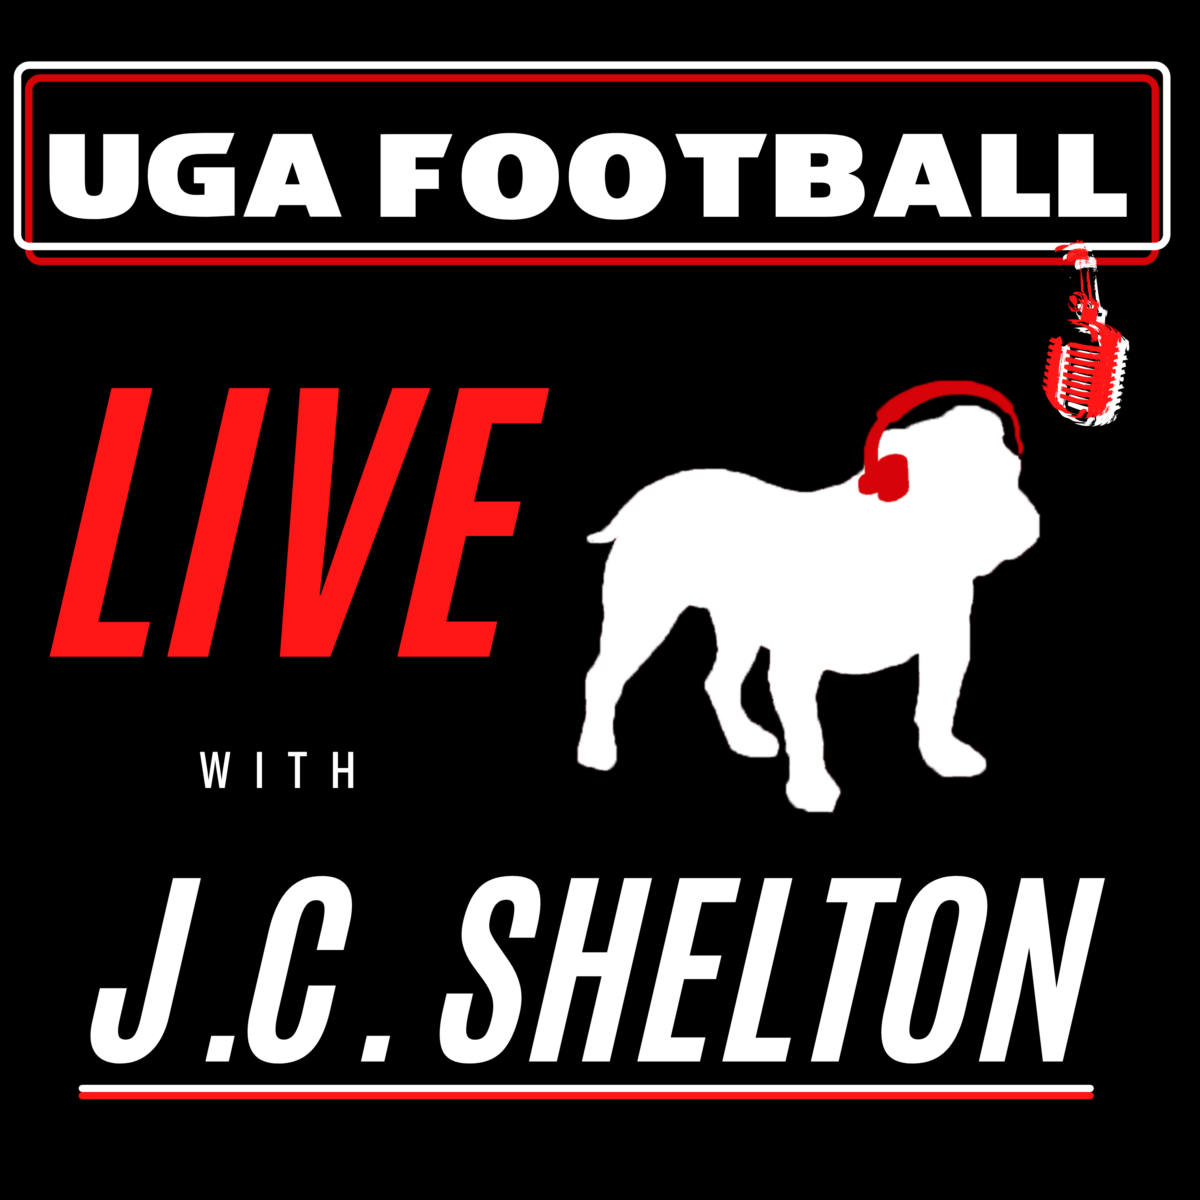 ‘UGA Football Live with J.C. Shelton’: G-Day special with former Georgia Bulldogs Hunter Long, Keith Marshall